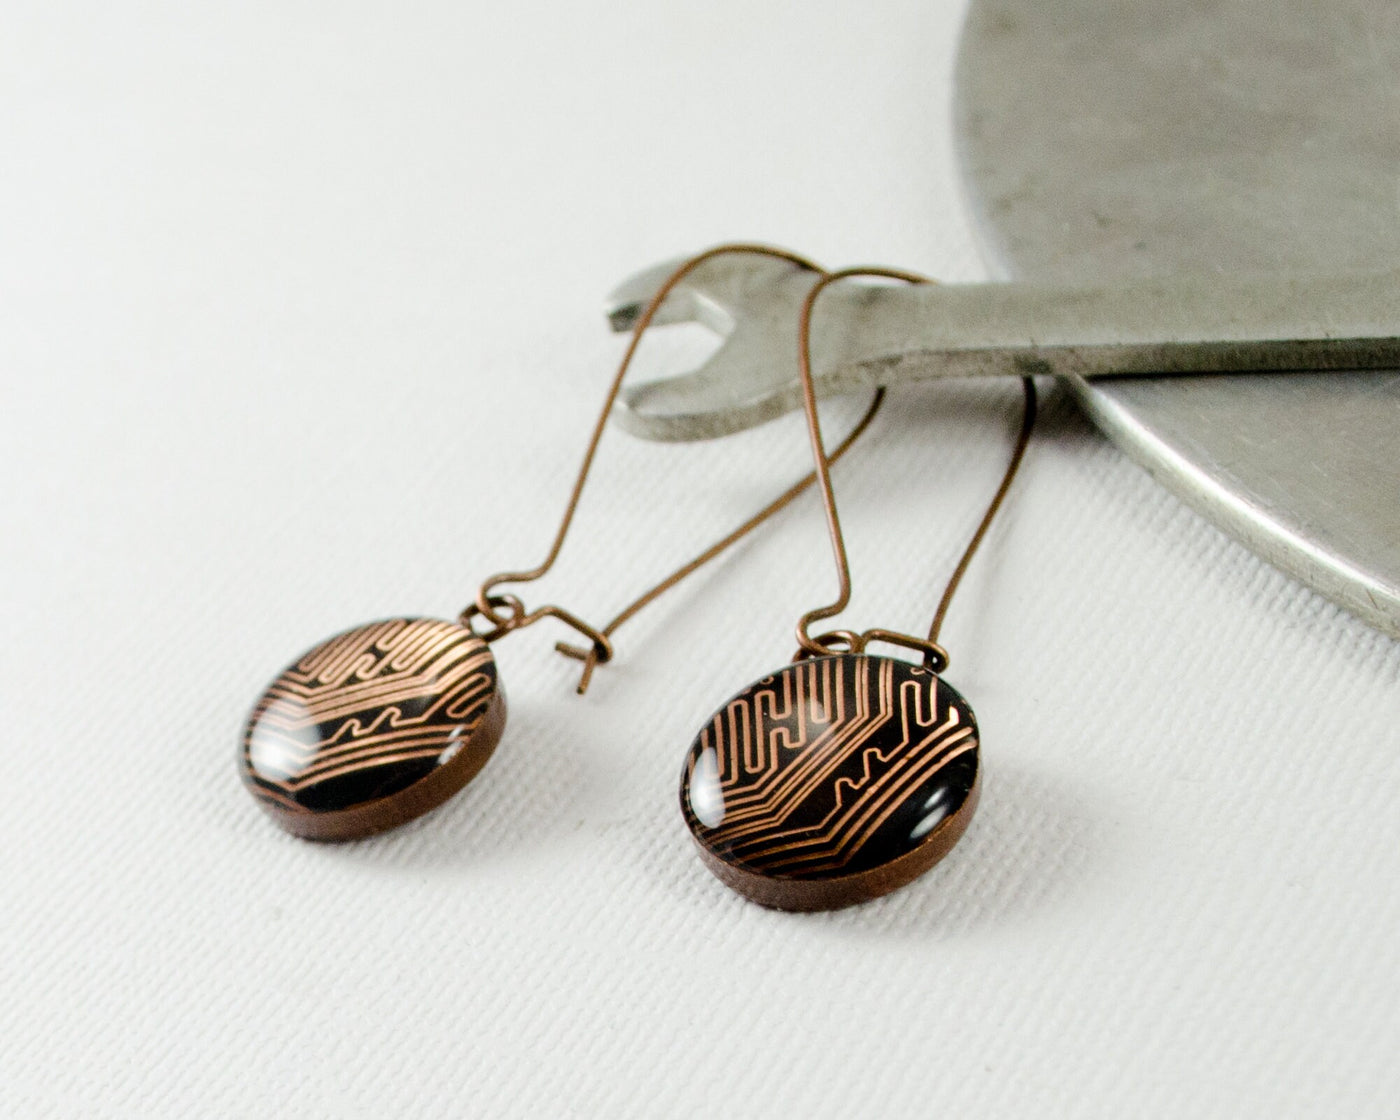 Copper Recycled Circuit Board Earrings, Dangle Earrings Nerdy Engineer Jewelry Gifts for Scientists Science Gift Wearable Technology